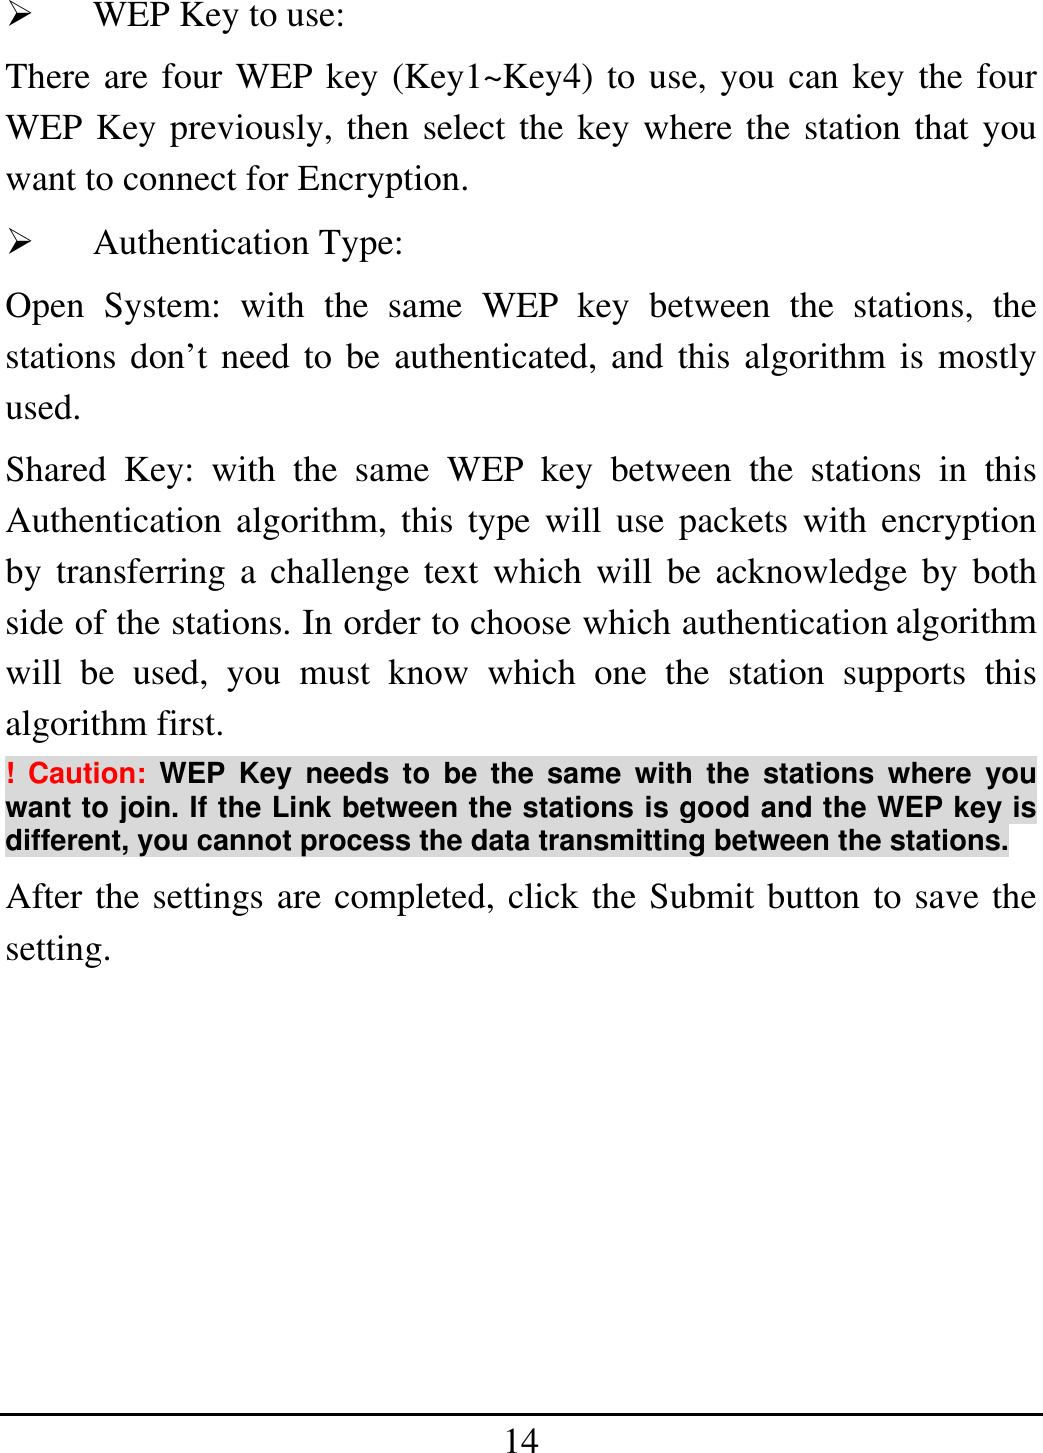 14   WEP Key to use: There are four WEP key (Key1~Key4) to use, you can key the four WEP Key previously, then select the key where the station that you want to connect for Encryption.   Authentication Type: Open System: with the same WEP key between the stations, the stations don’t need to be authenticated, and this algorithm is mostly used.  Shared Key: with the same WEP key between the stations in this Authentication algorithm, this type will use packets with encryption by transferring a challenge text which will be acknowledge by both side of the stations. In order to choose which authentication algorithm will be used, you must know which one the station supports this algorithm first. ! Caution: WEP Key needs to be the same with the stations where you want to join. If the Link between the stations is good and the WEP key is different, you cannot process the data transmitting between the stations. After the settings are completed, click the Submit button to save the setting.         